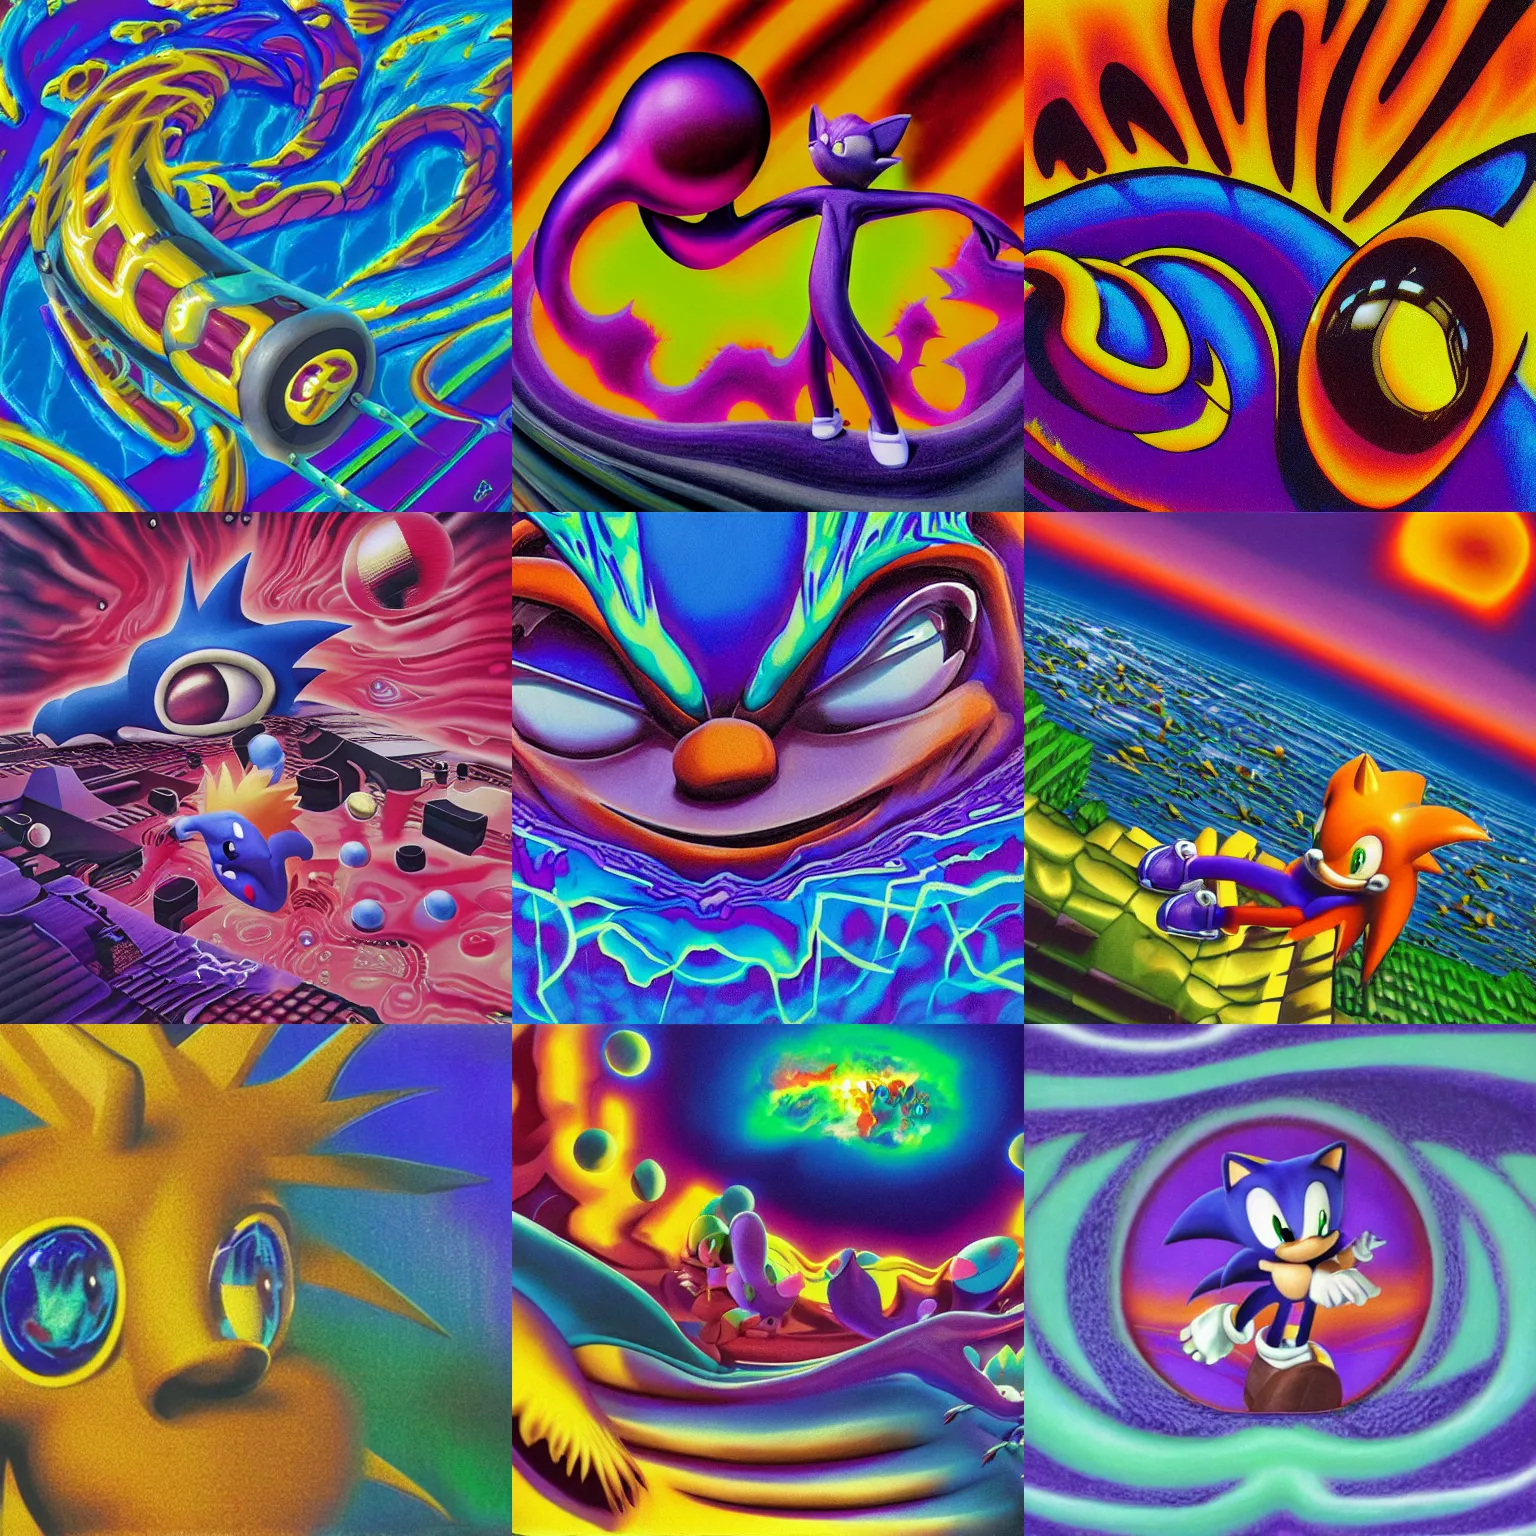 Prompt: dreaming of sonic the hedgehog closeup portrait lava lamp claymation scifi matte painting landscape of a surreal alex grey, sonic retro moulded professional soft pastels high quality airbrush art album cover of a liquid dissolving airbrush sonic the hedgehog art lsd sonic the hedgehog swimming through cyberspace purple checkerboard background 1 9 8 0 s 1 9 8 2 sega genesis video game